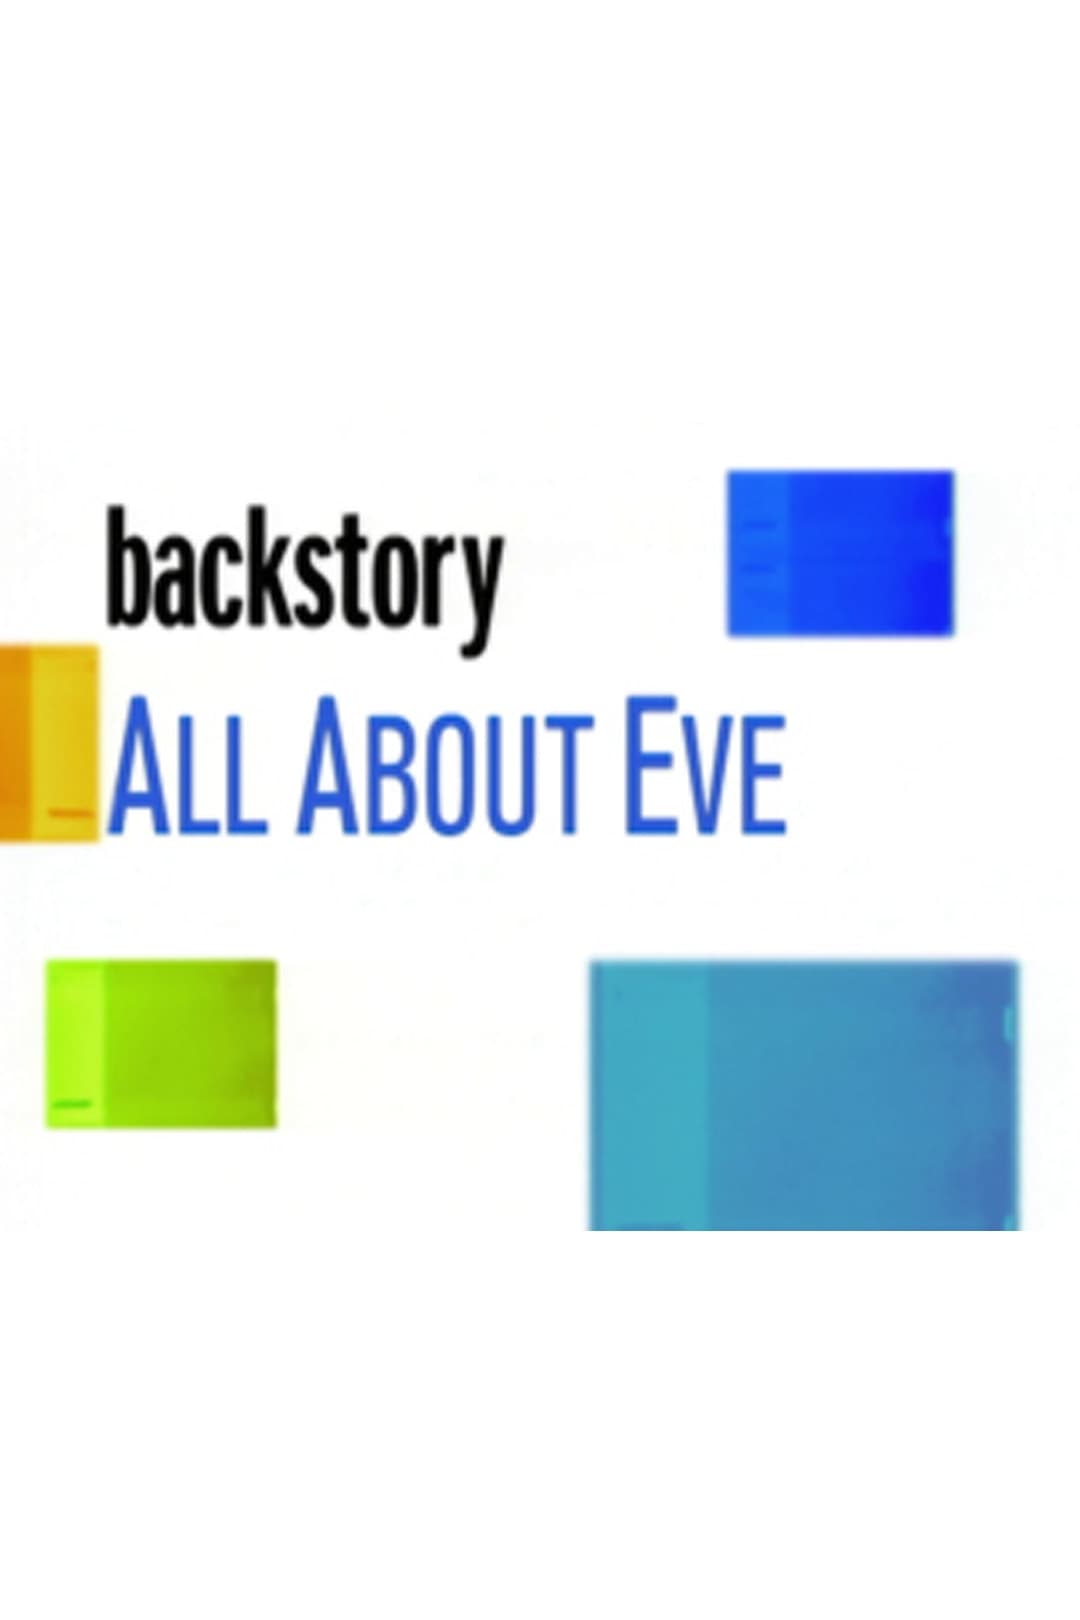 Backstory: 'All About Eve'